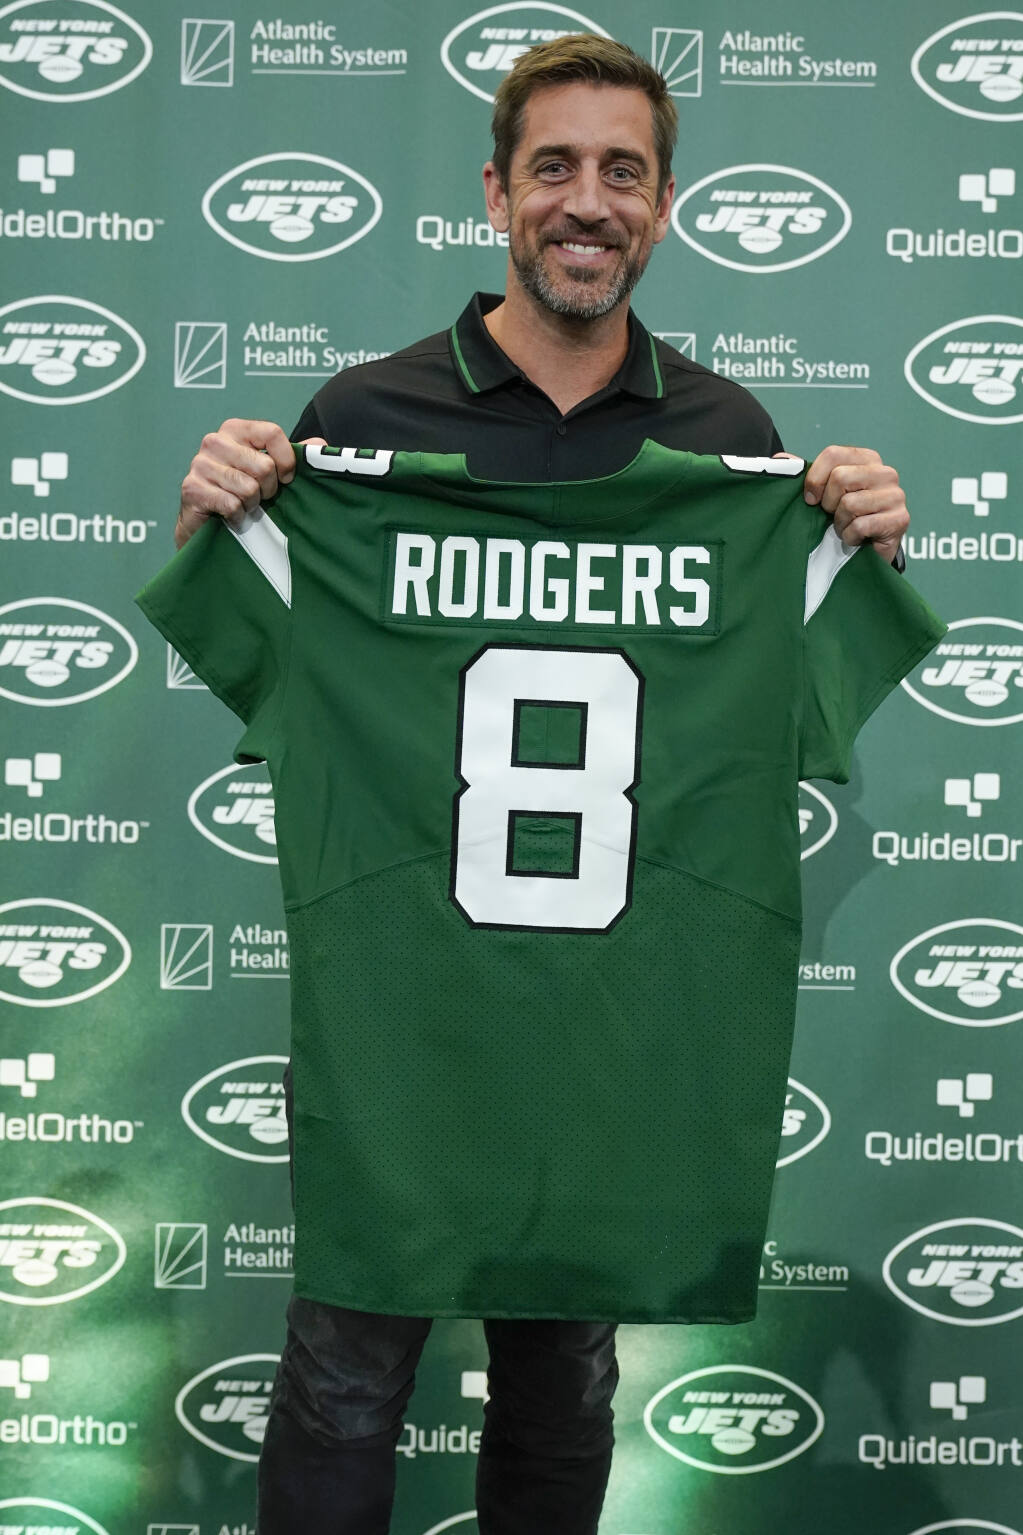 Aaron Rodgers introduced as New York Jets quarterback: 'This is a